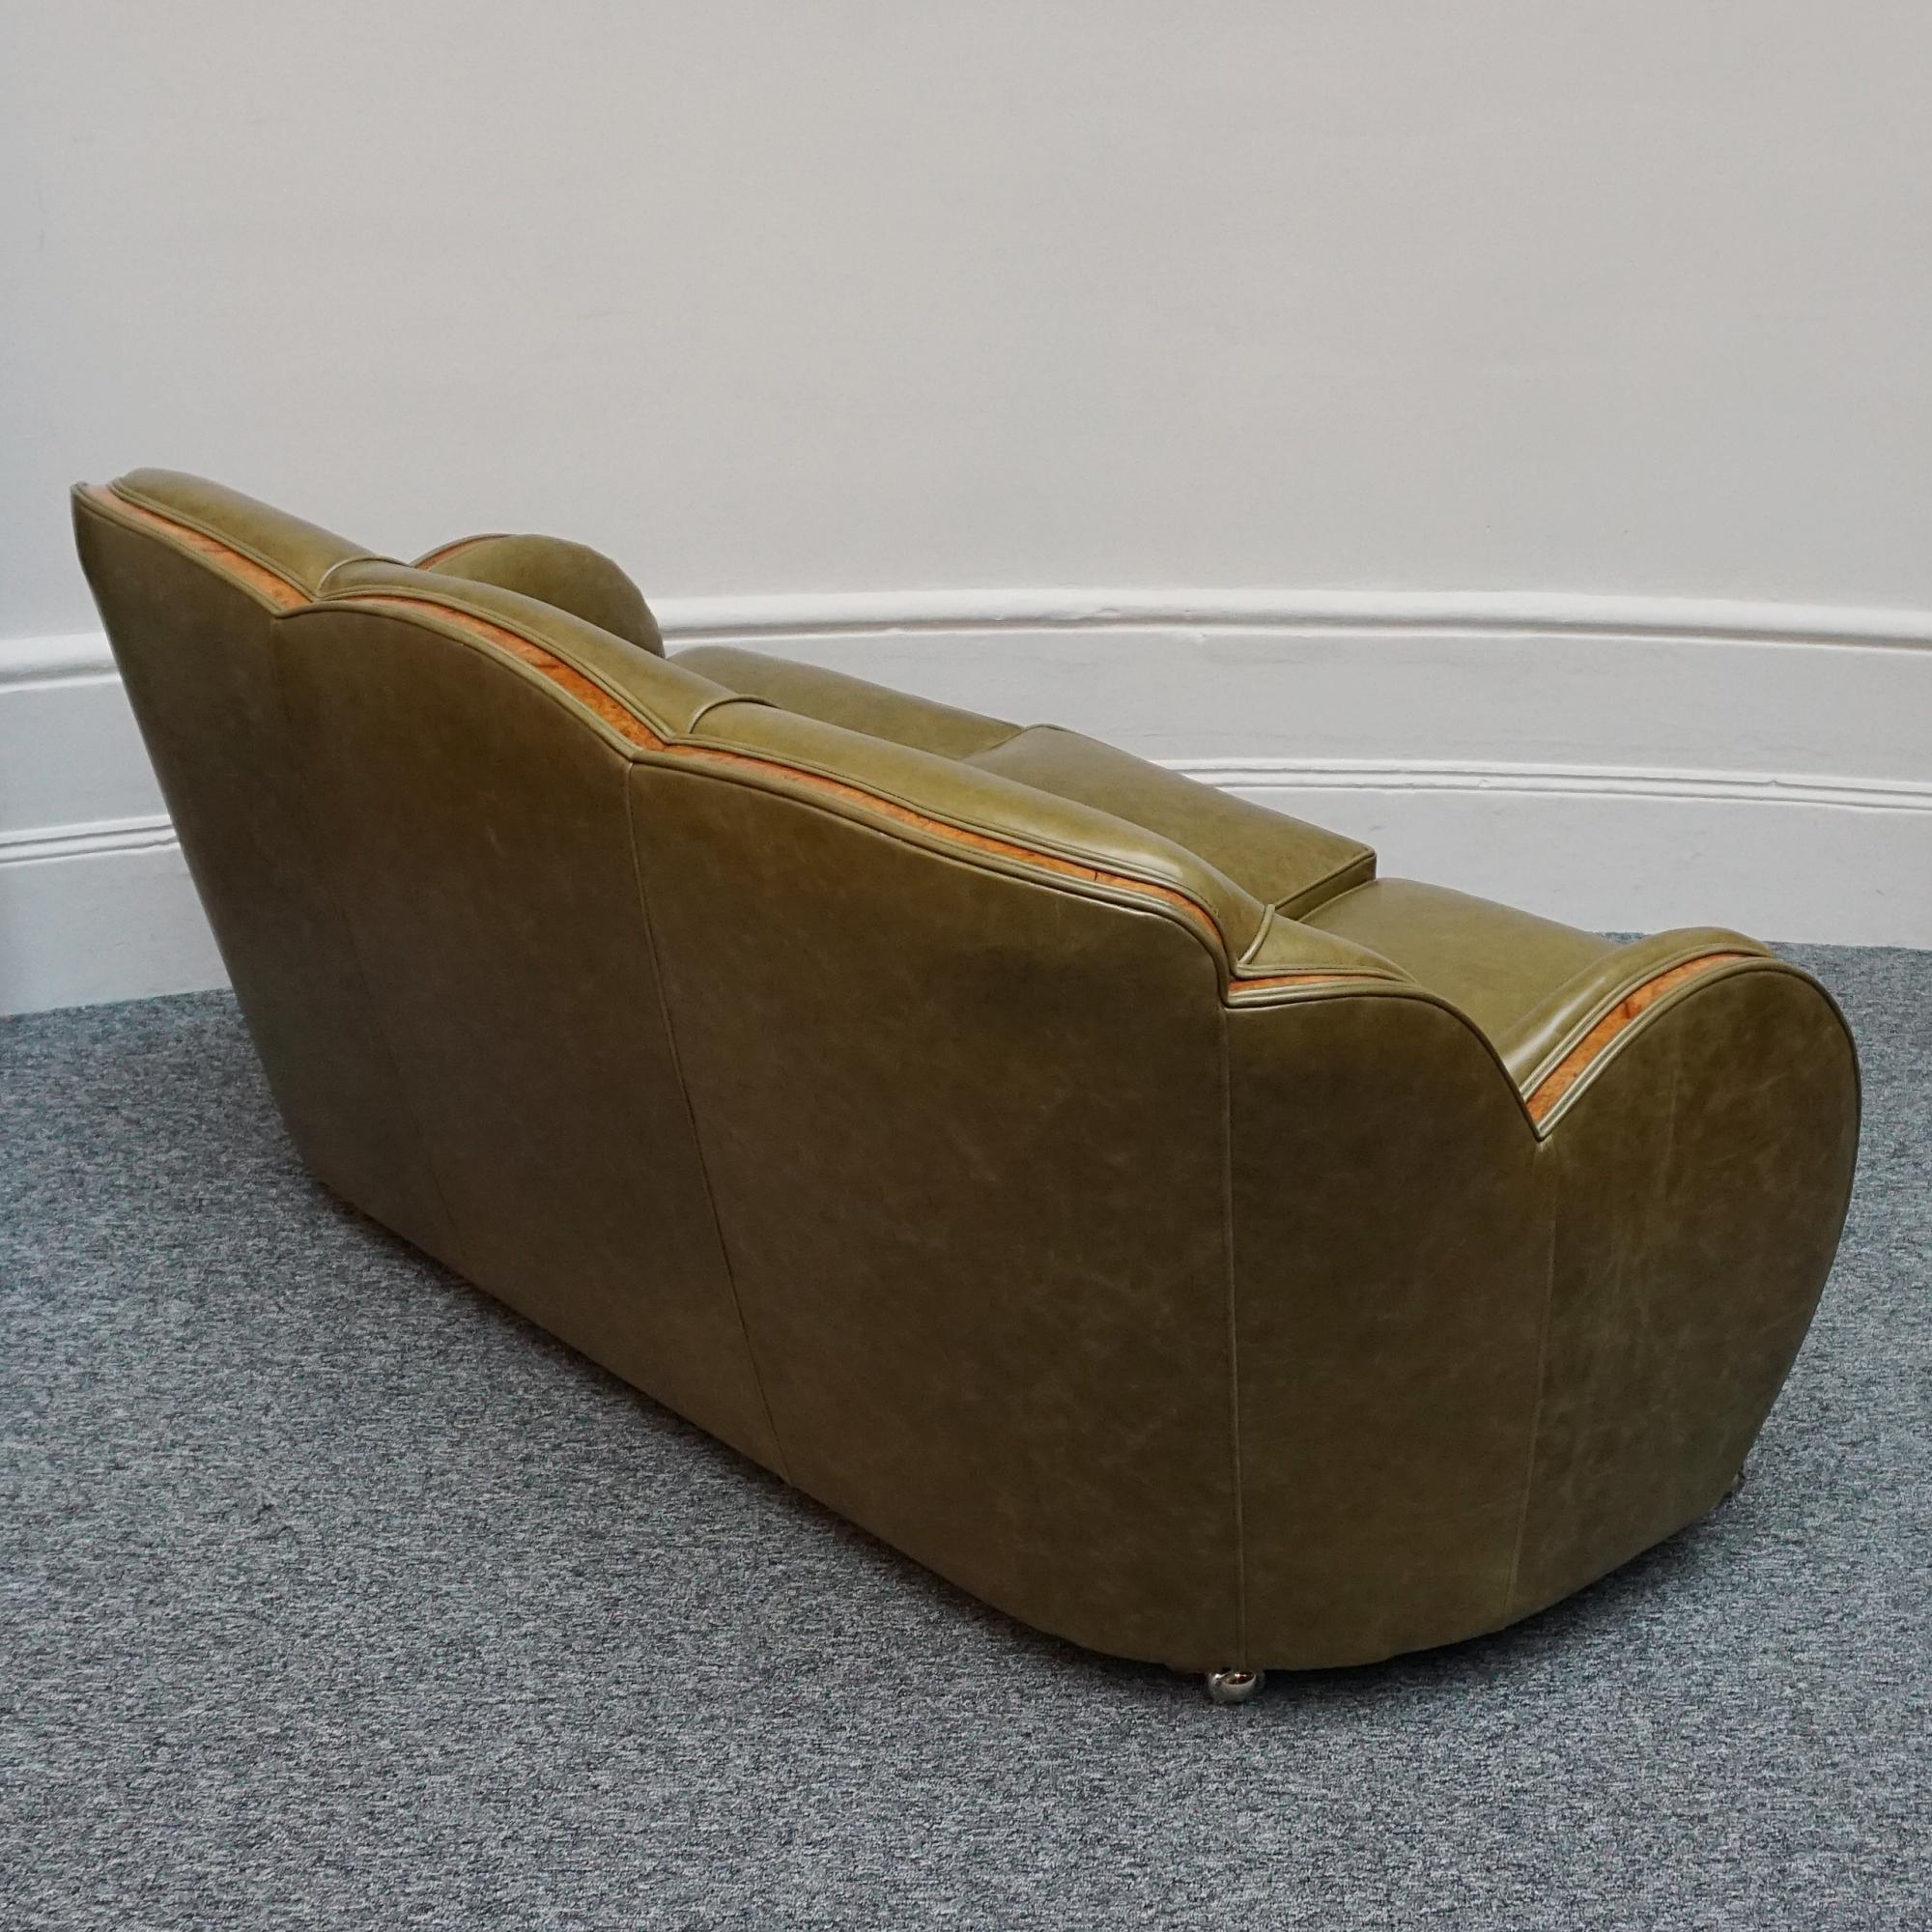 English Art Deco Cloud Sofa by Harry & Lou Epstein Upholstered in Green Leather  For Sale 8